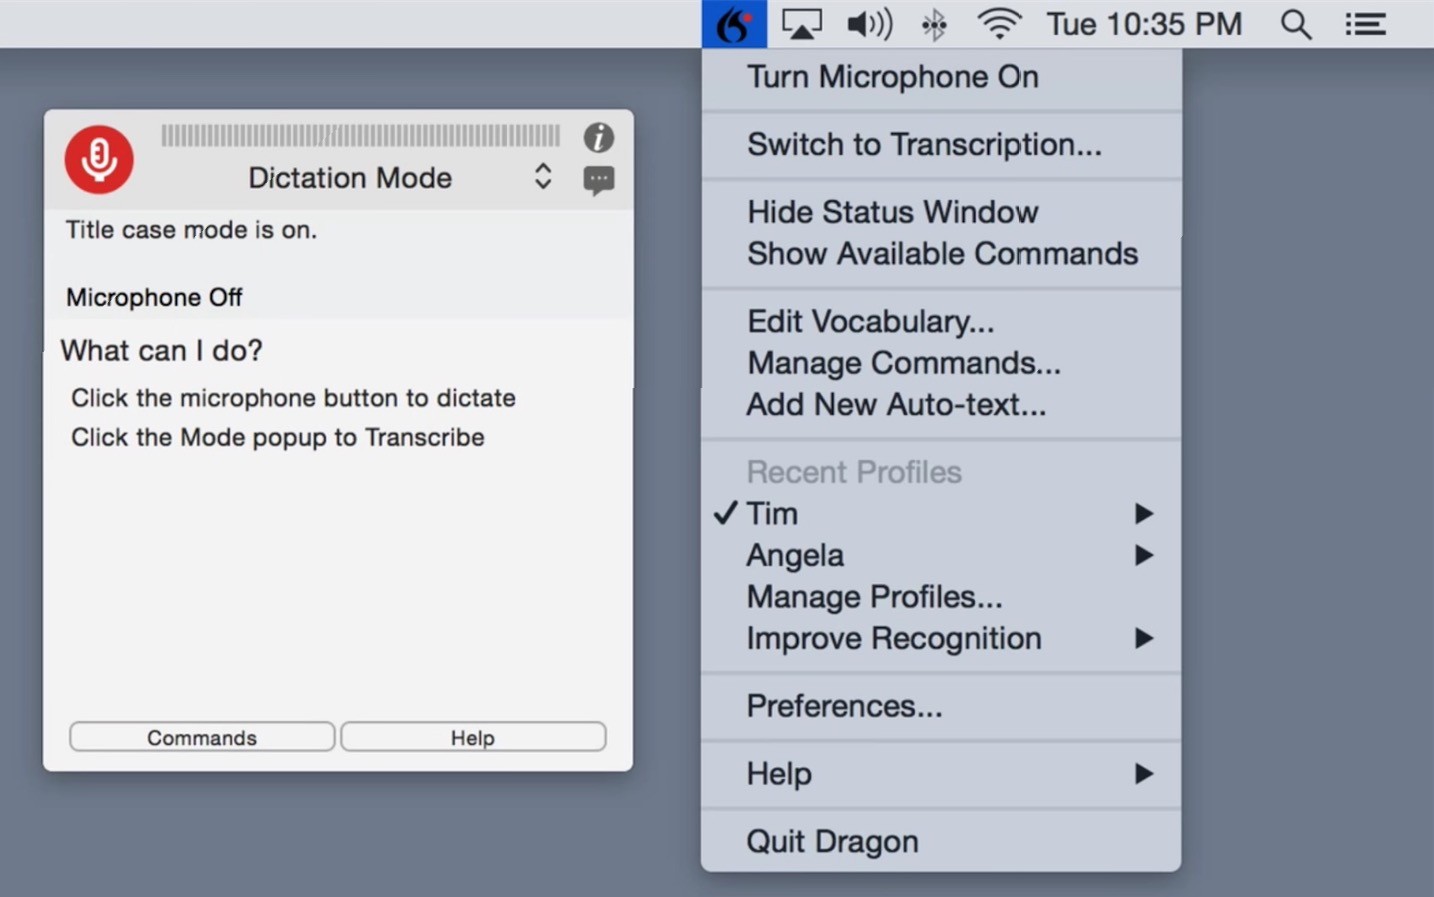 free dragon dictate for mac